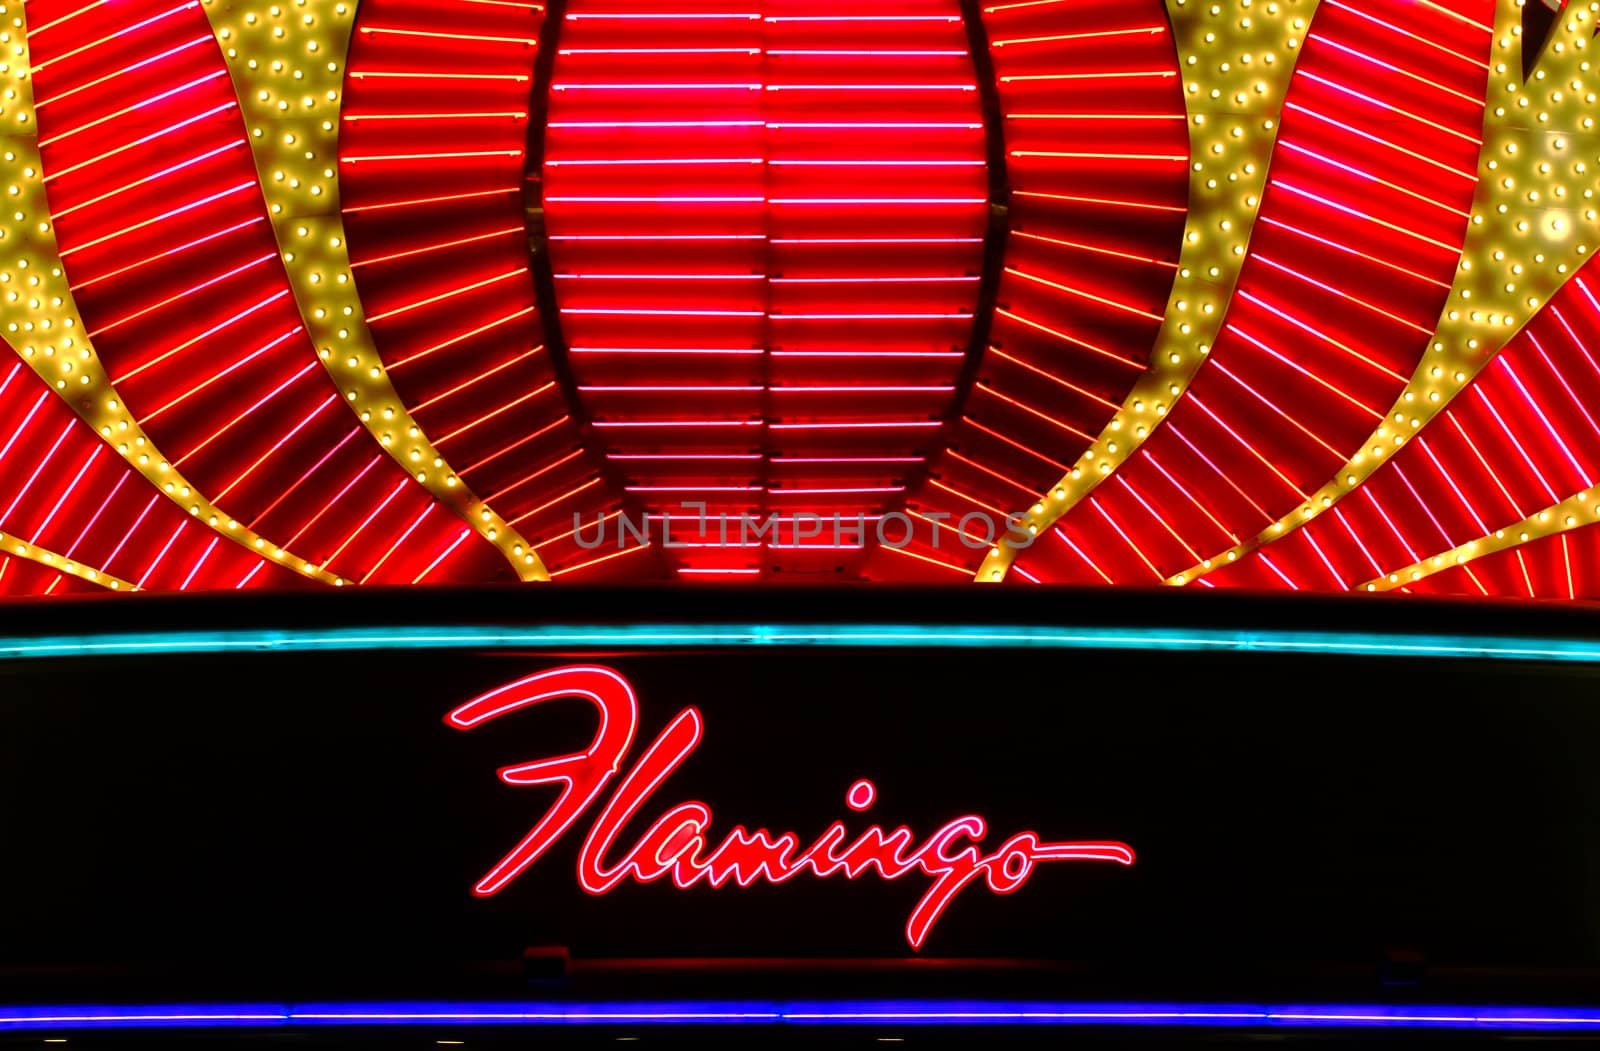 Las Vegas, USA - May 22, 2012: The Flamingo Las Vegas is a hotel and casino located on the famous Las Vegas Strip and has a art deco theme.  The Flamingo opened in 1946 and seen here is the entrance on Las Vegas Boulevard.